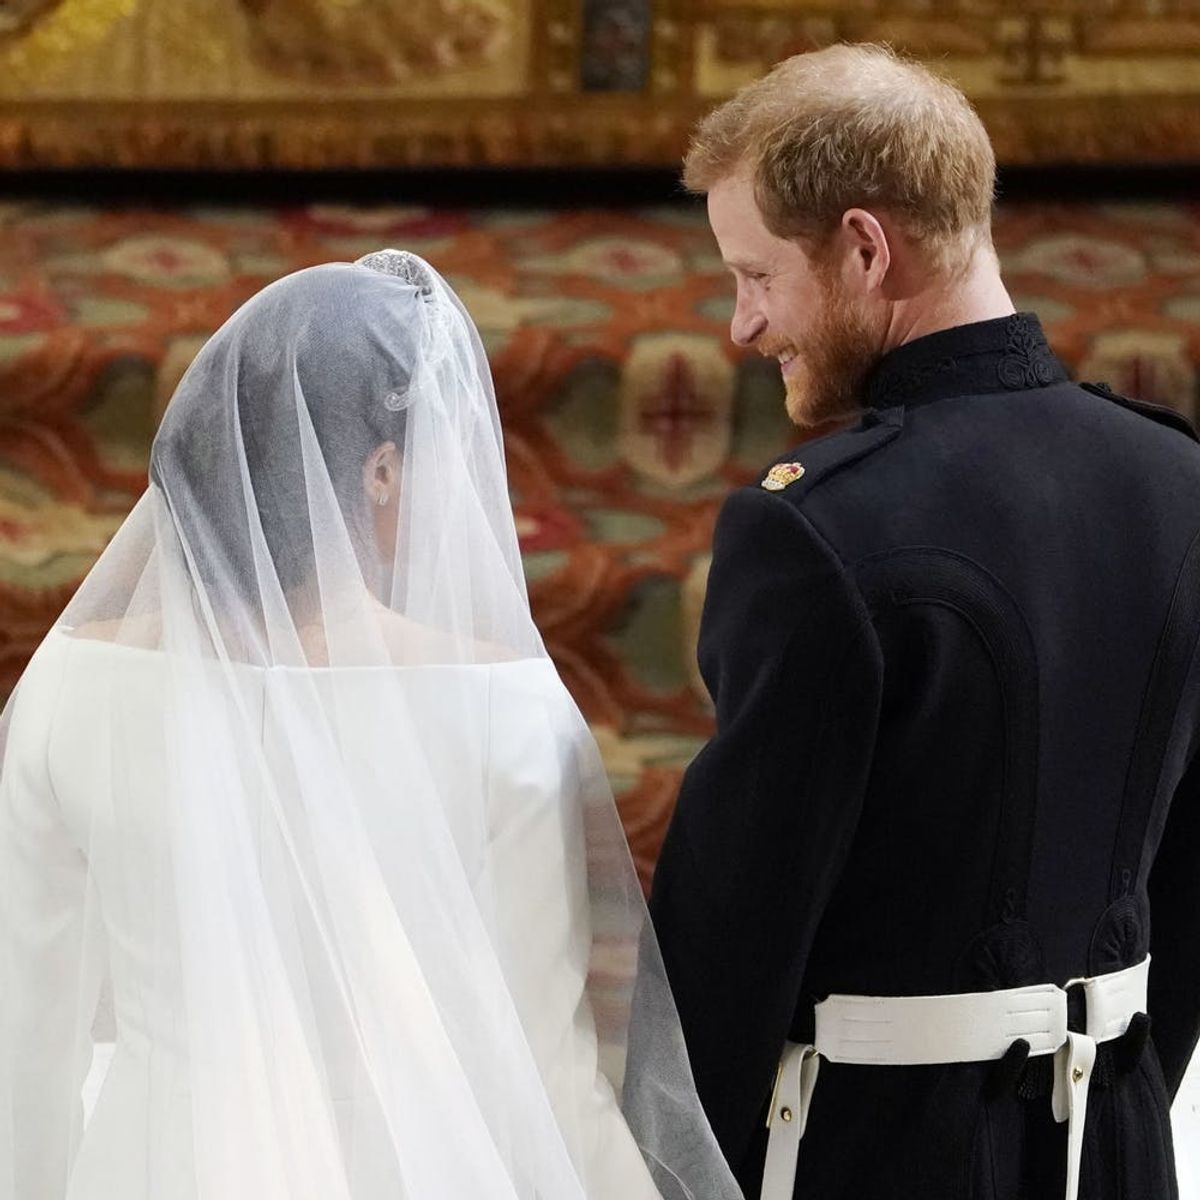 Royal Wedding: Prince Harry’s Reaction to Seeing Meghan Markle Walk Down the Aisle Will Melt Your Heart